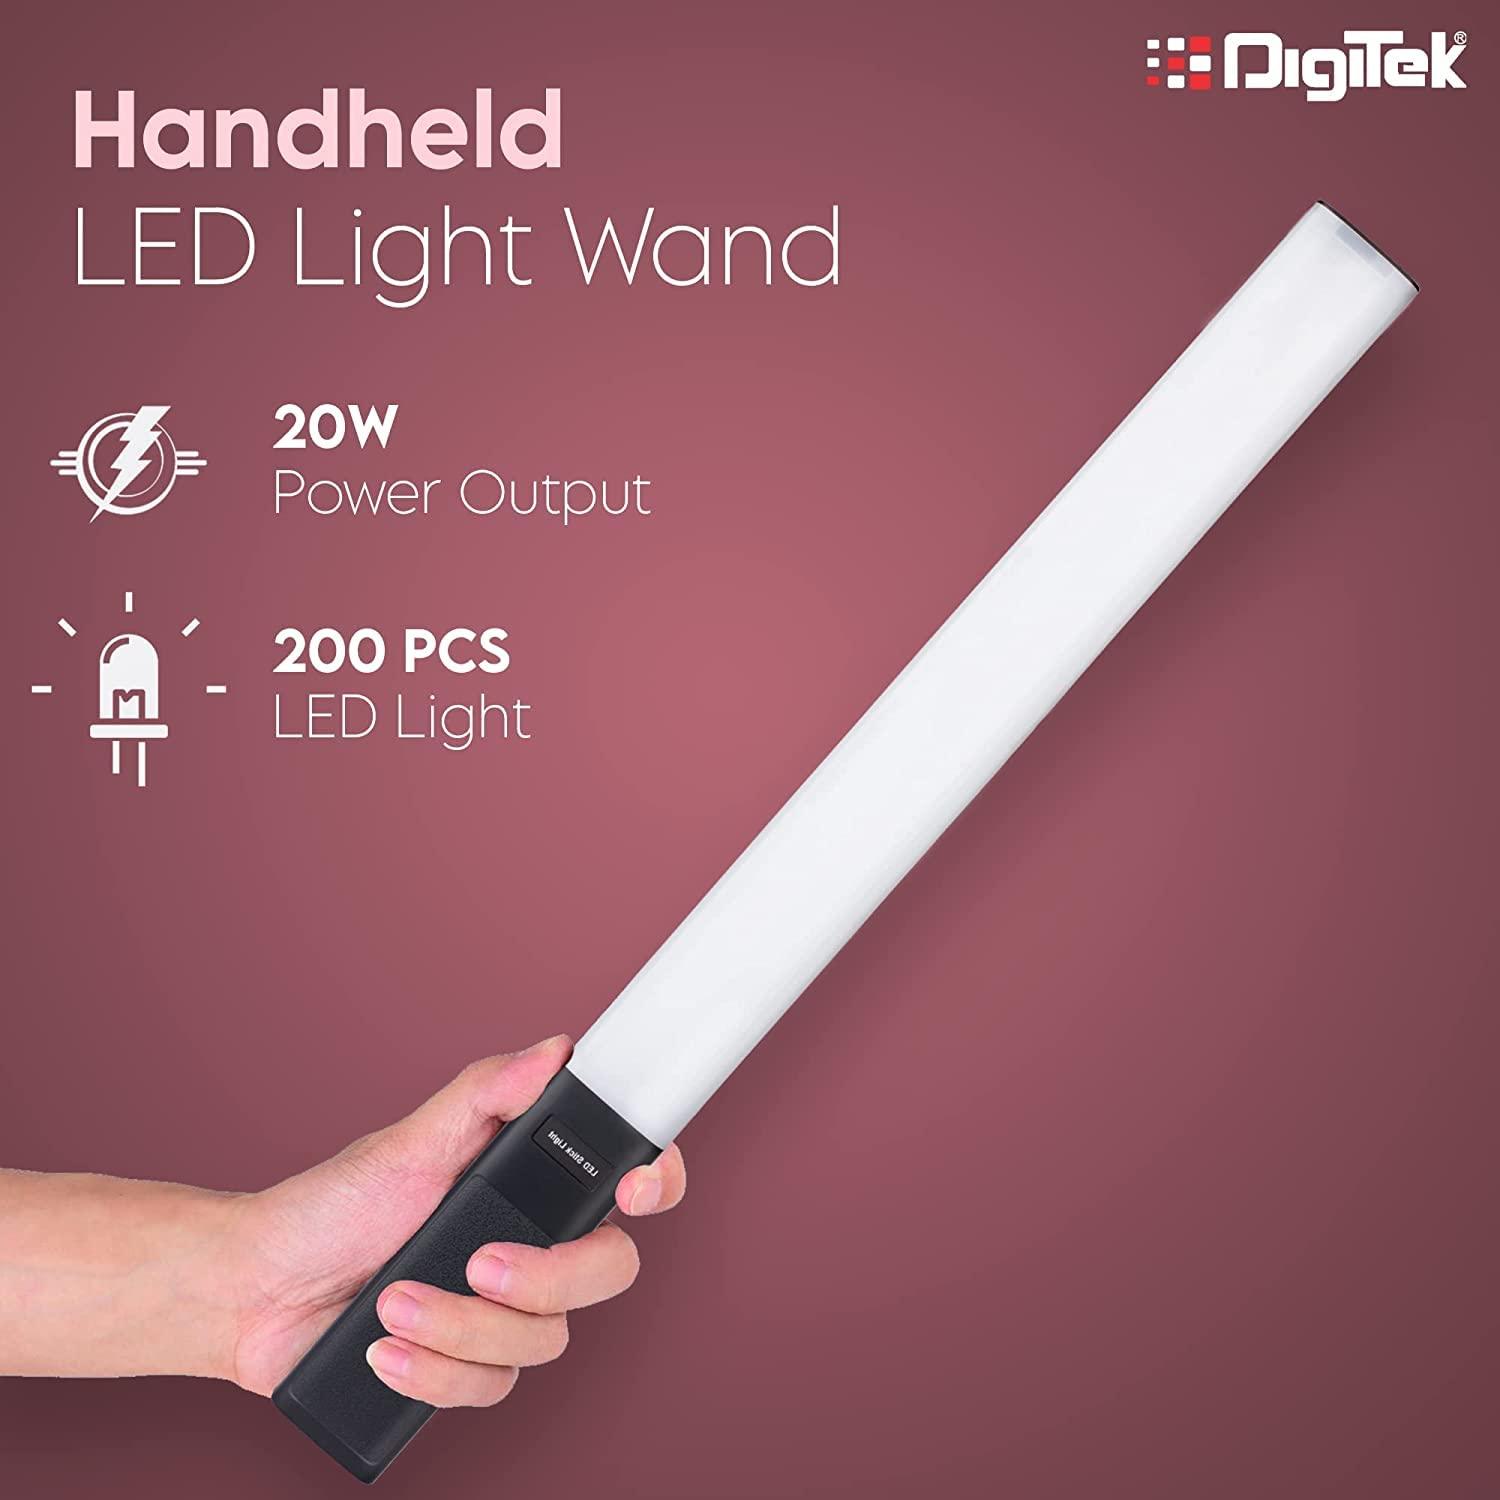 Digitek (DSL-20W Combo) Portable Handheld LED Light Wand with NP F750 Battery & Remote for YouTube, Photo-Shoot, Video Shoot, Live Stream, Makeup & More, Compatible with Smart Phone & Cameras. DSL-20W Combo - Digitek